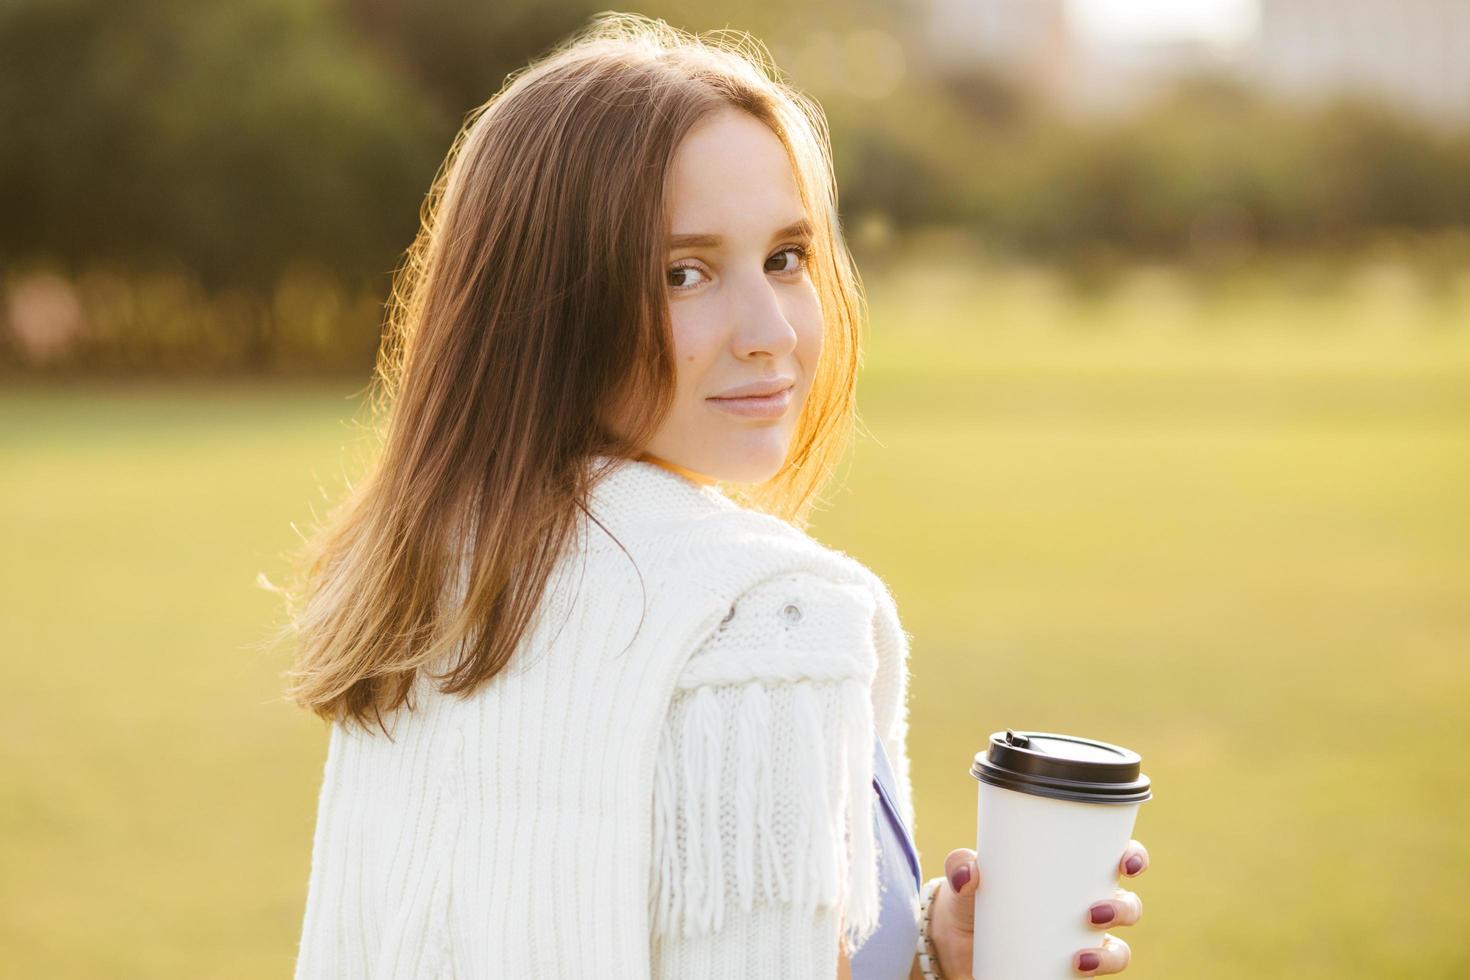 Relaxed attractive young female model with dark hair, drinks takeaway coffee, stands back, has outdoor stroll, enjoys sunny warm day, looks directly at camera. People, rest and lifestyle concept photo